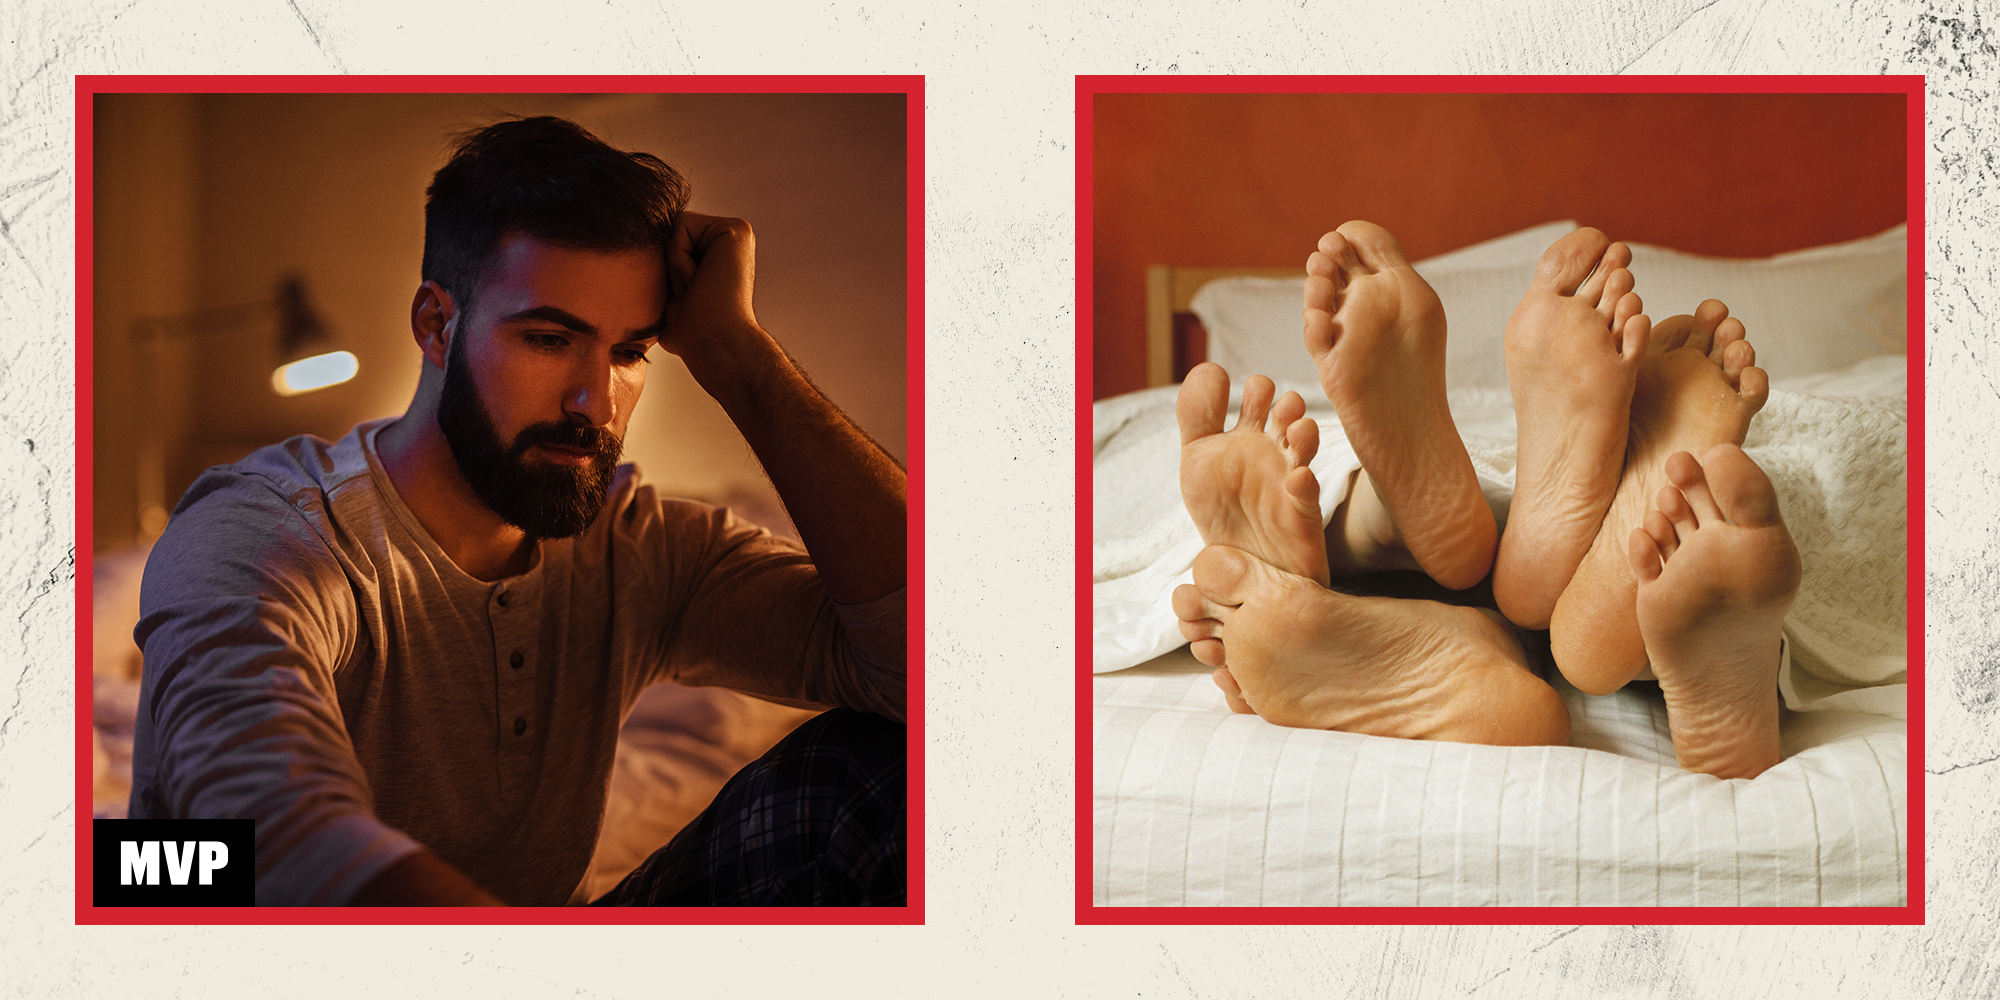 side by side images of a man looking distressed and three sets of feet in bed together